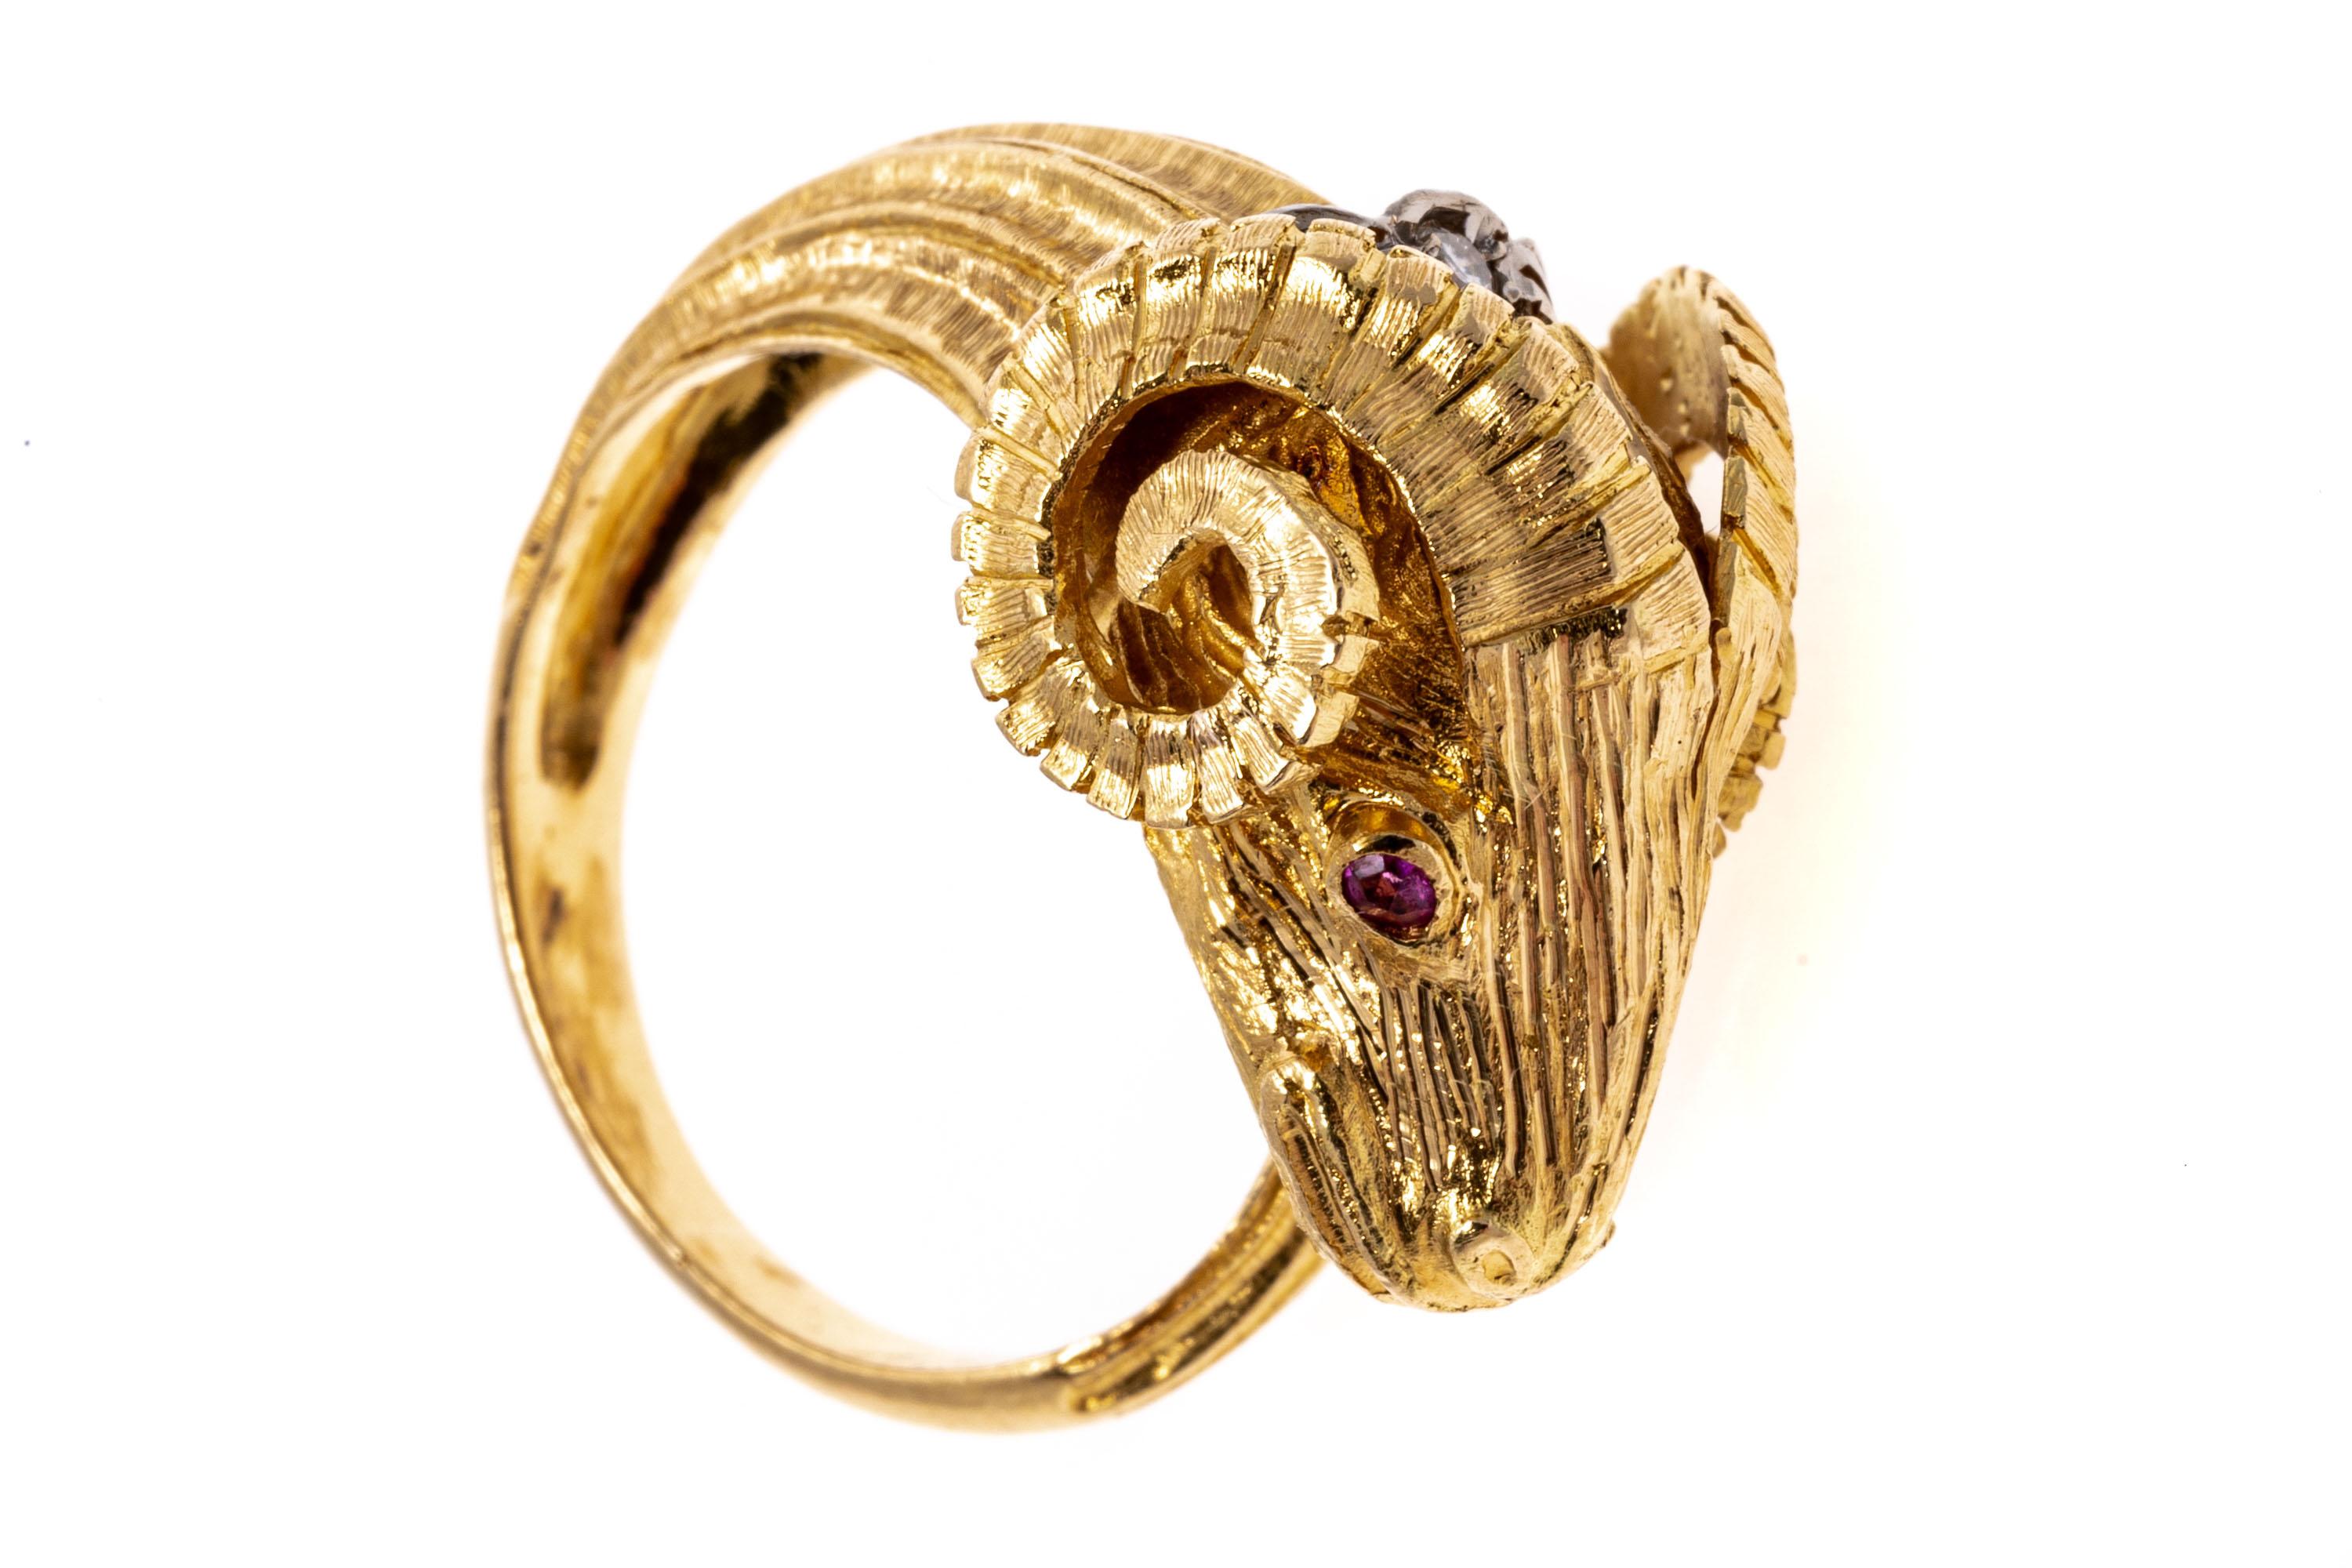 Created in Greece, this 18K yellow gold ring features the head of a ram with the tail wrapping around the finger. Set into the eyes of the ram are round cut rubies while a single brilliant round cut diamond is set at the back of the head. The rubies